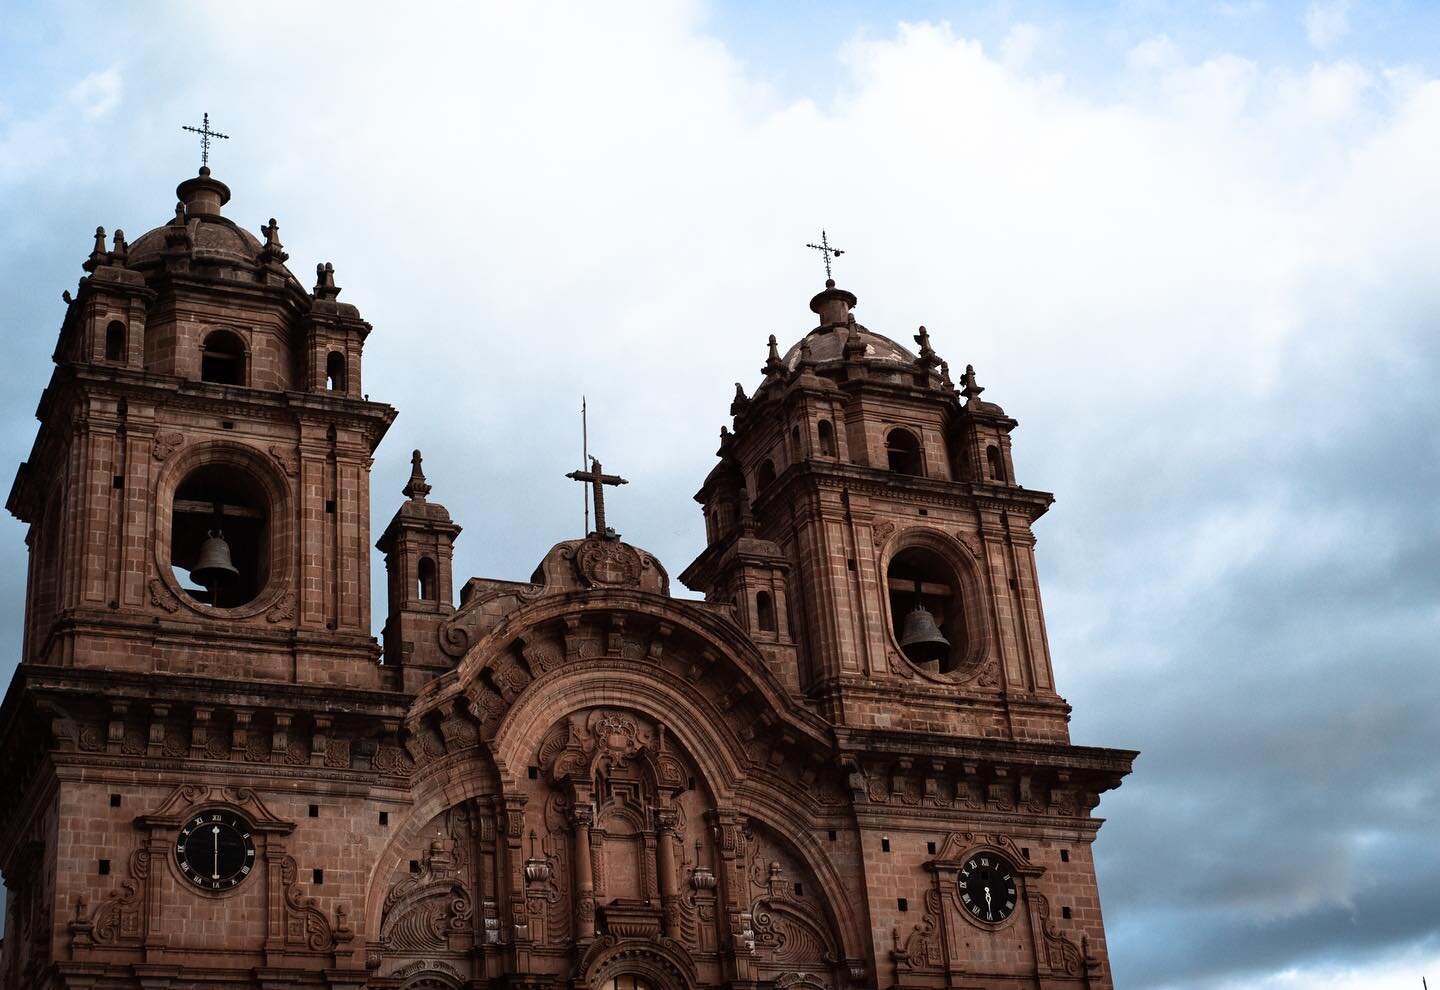 The architecture in Cusco changes colors depending on the lighting.

#eastwinds #cusco #peru #cathedral #amwriting #amwritingmemoir #memoir #travelphotography #travelgram #travelersnotebook